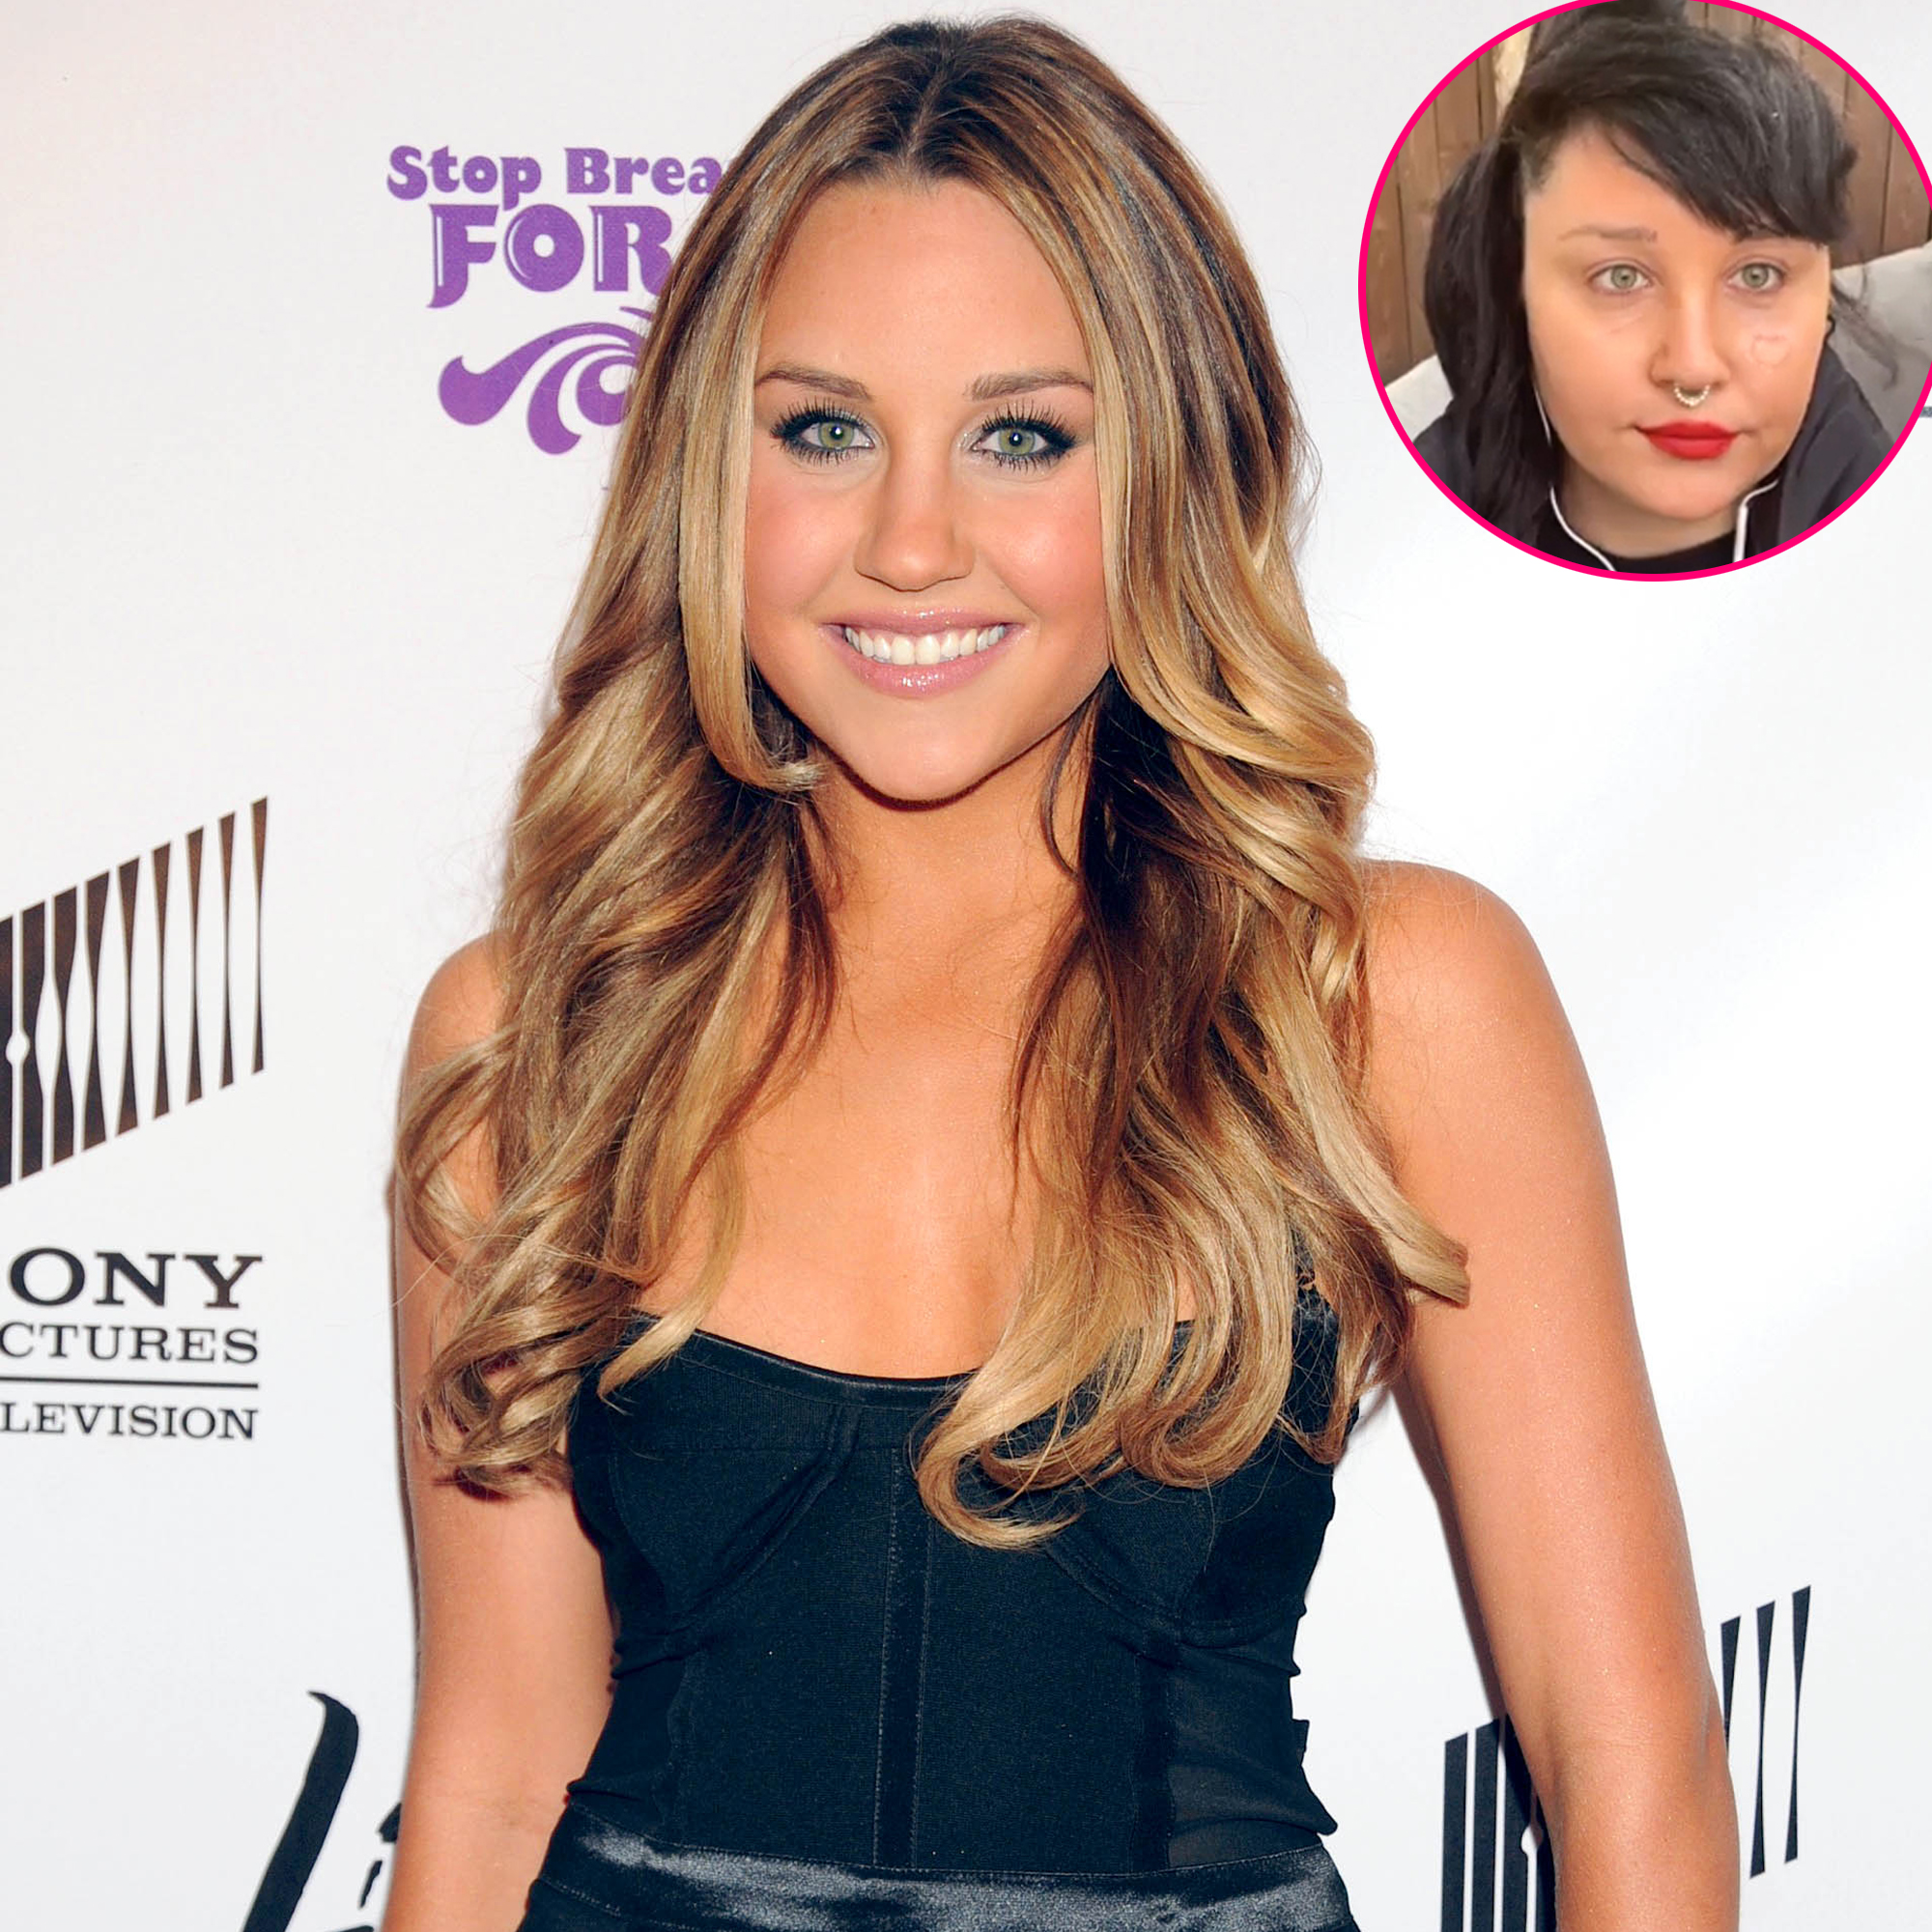 Amanda Bynes Gets Tattoo Removed Before Conservatorship Hearing